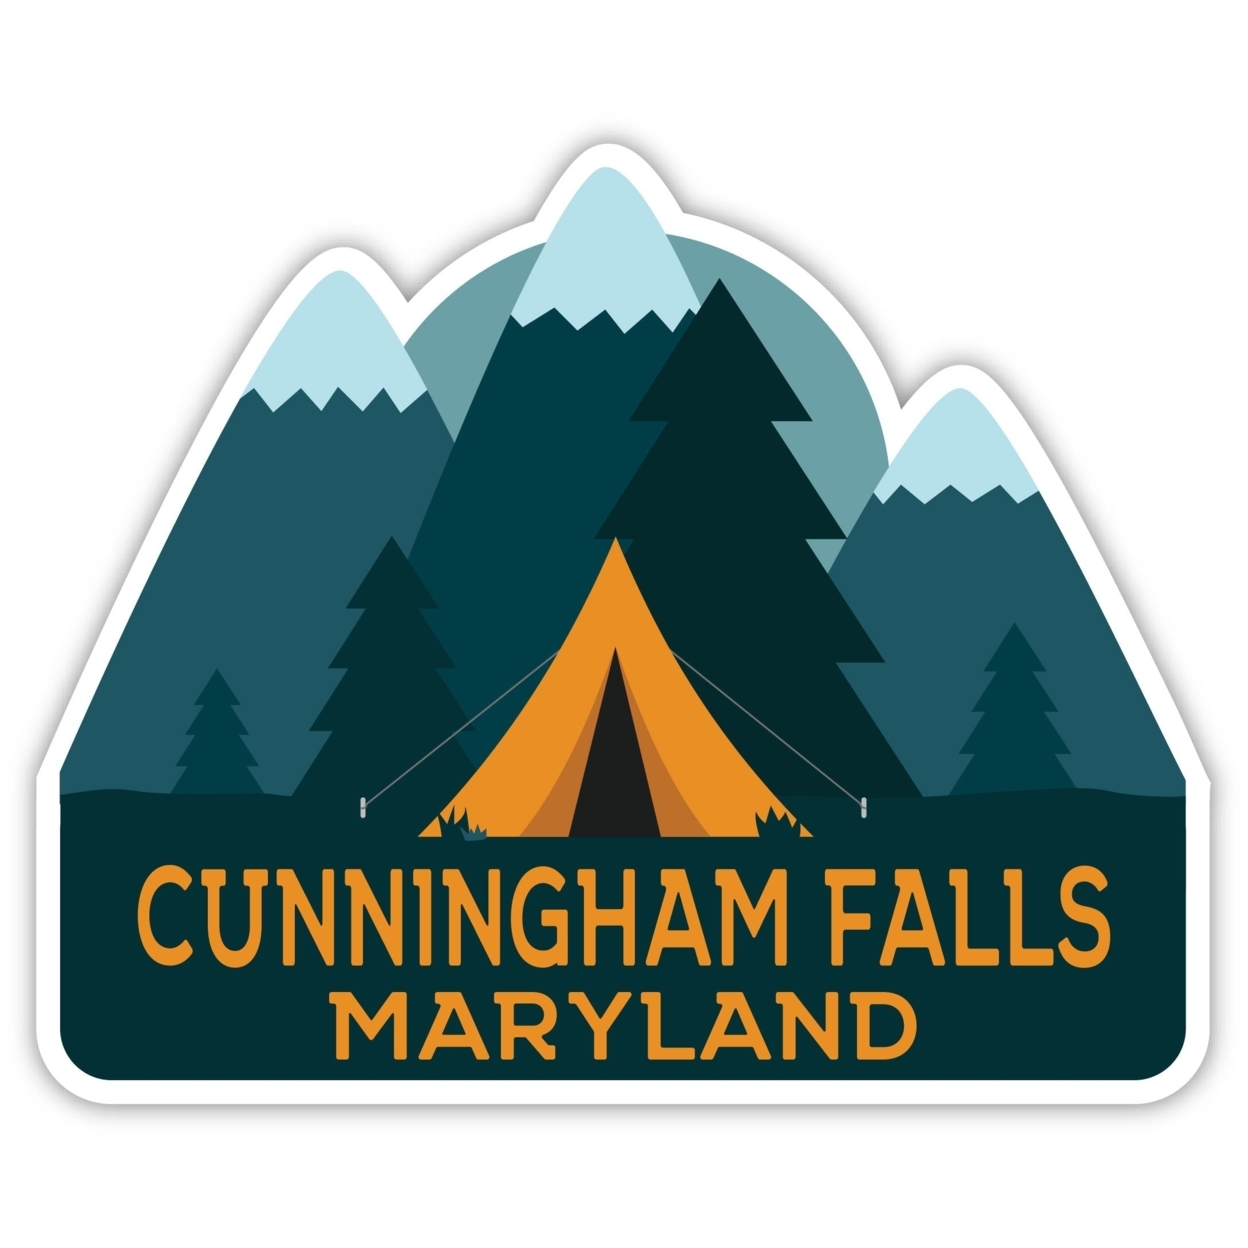 Cunningham Falls Maryland Souvenir Decorative Stickers (Choose Theme And Size) - Single Unit, 8-Inch, Tent